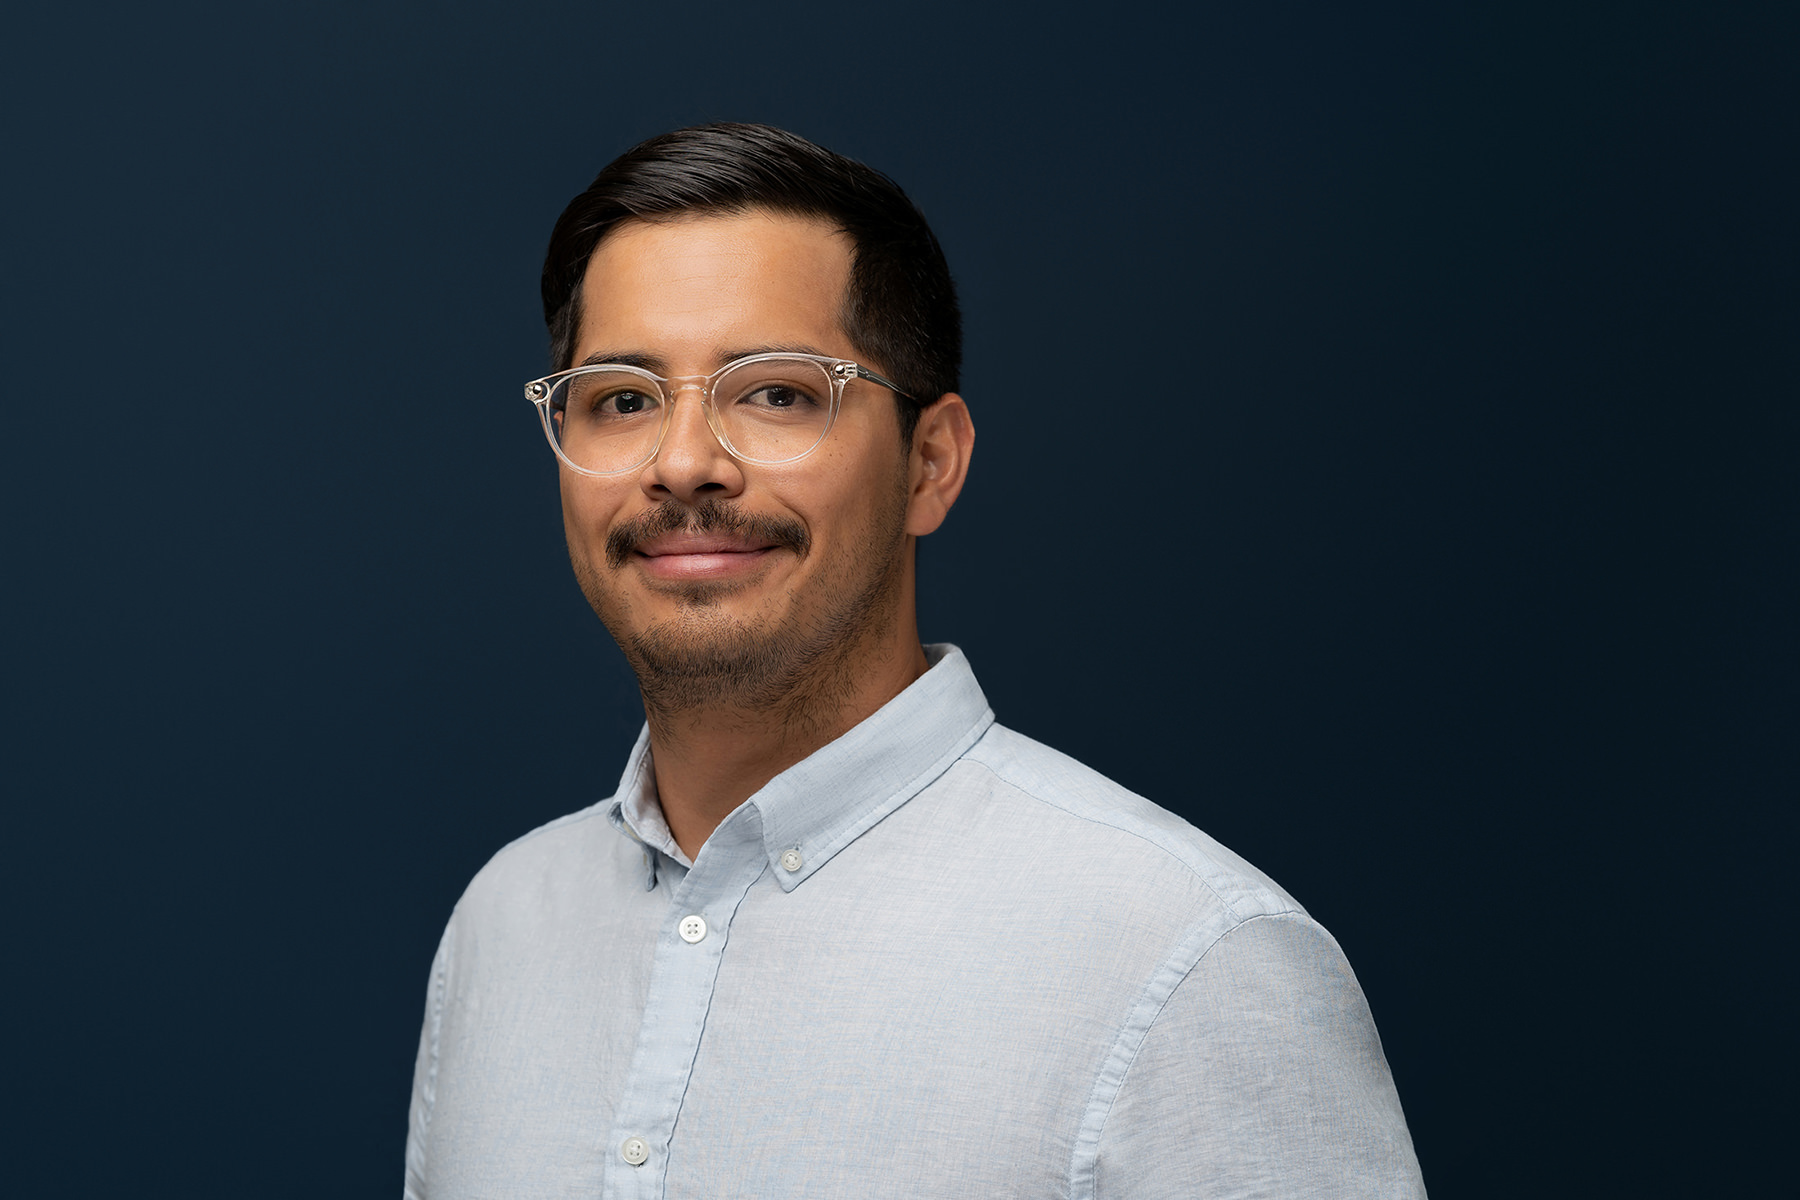 Man with glasses wearing a light blue shirt smiling against a dark blue background in his Denver headshots.